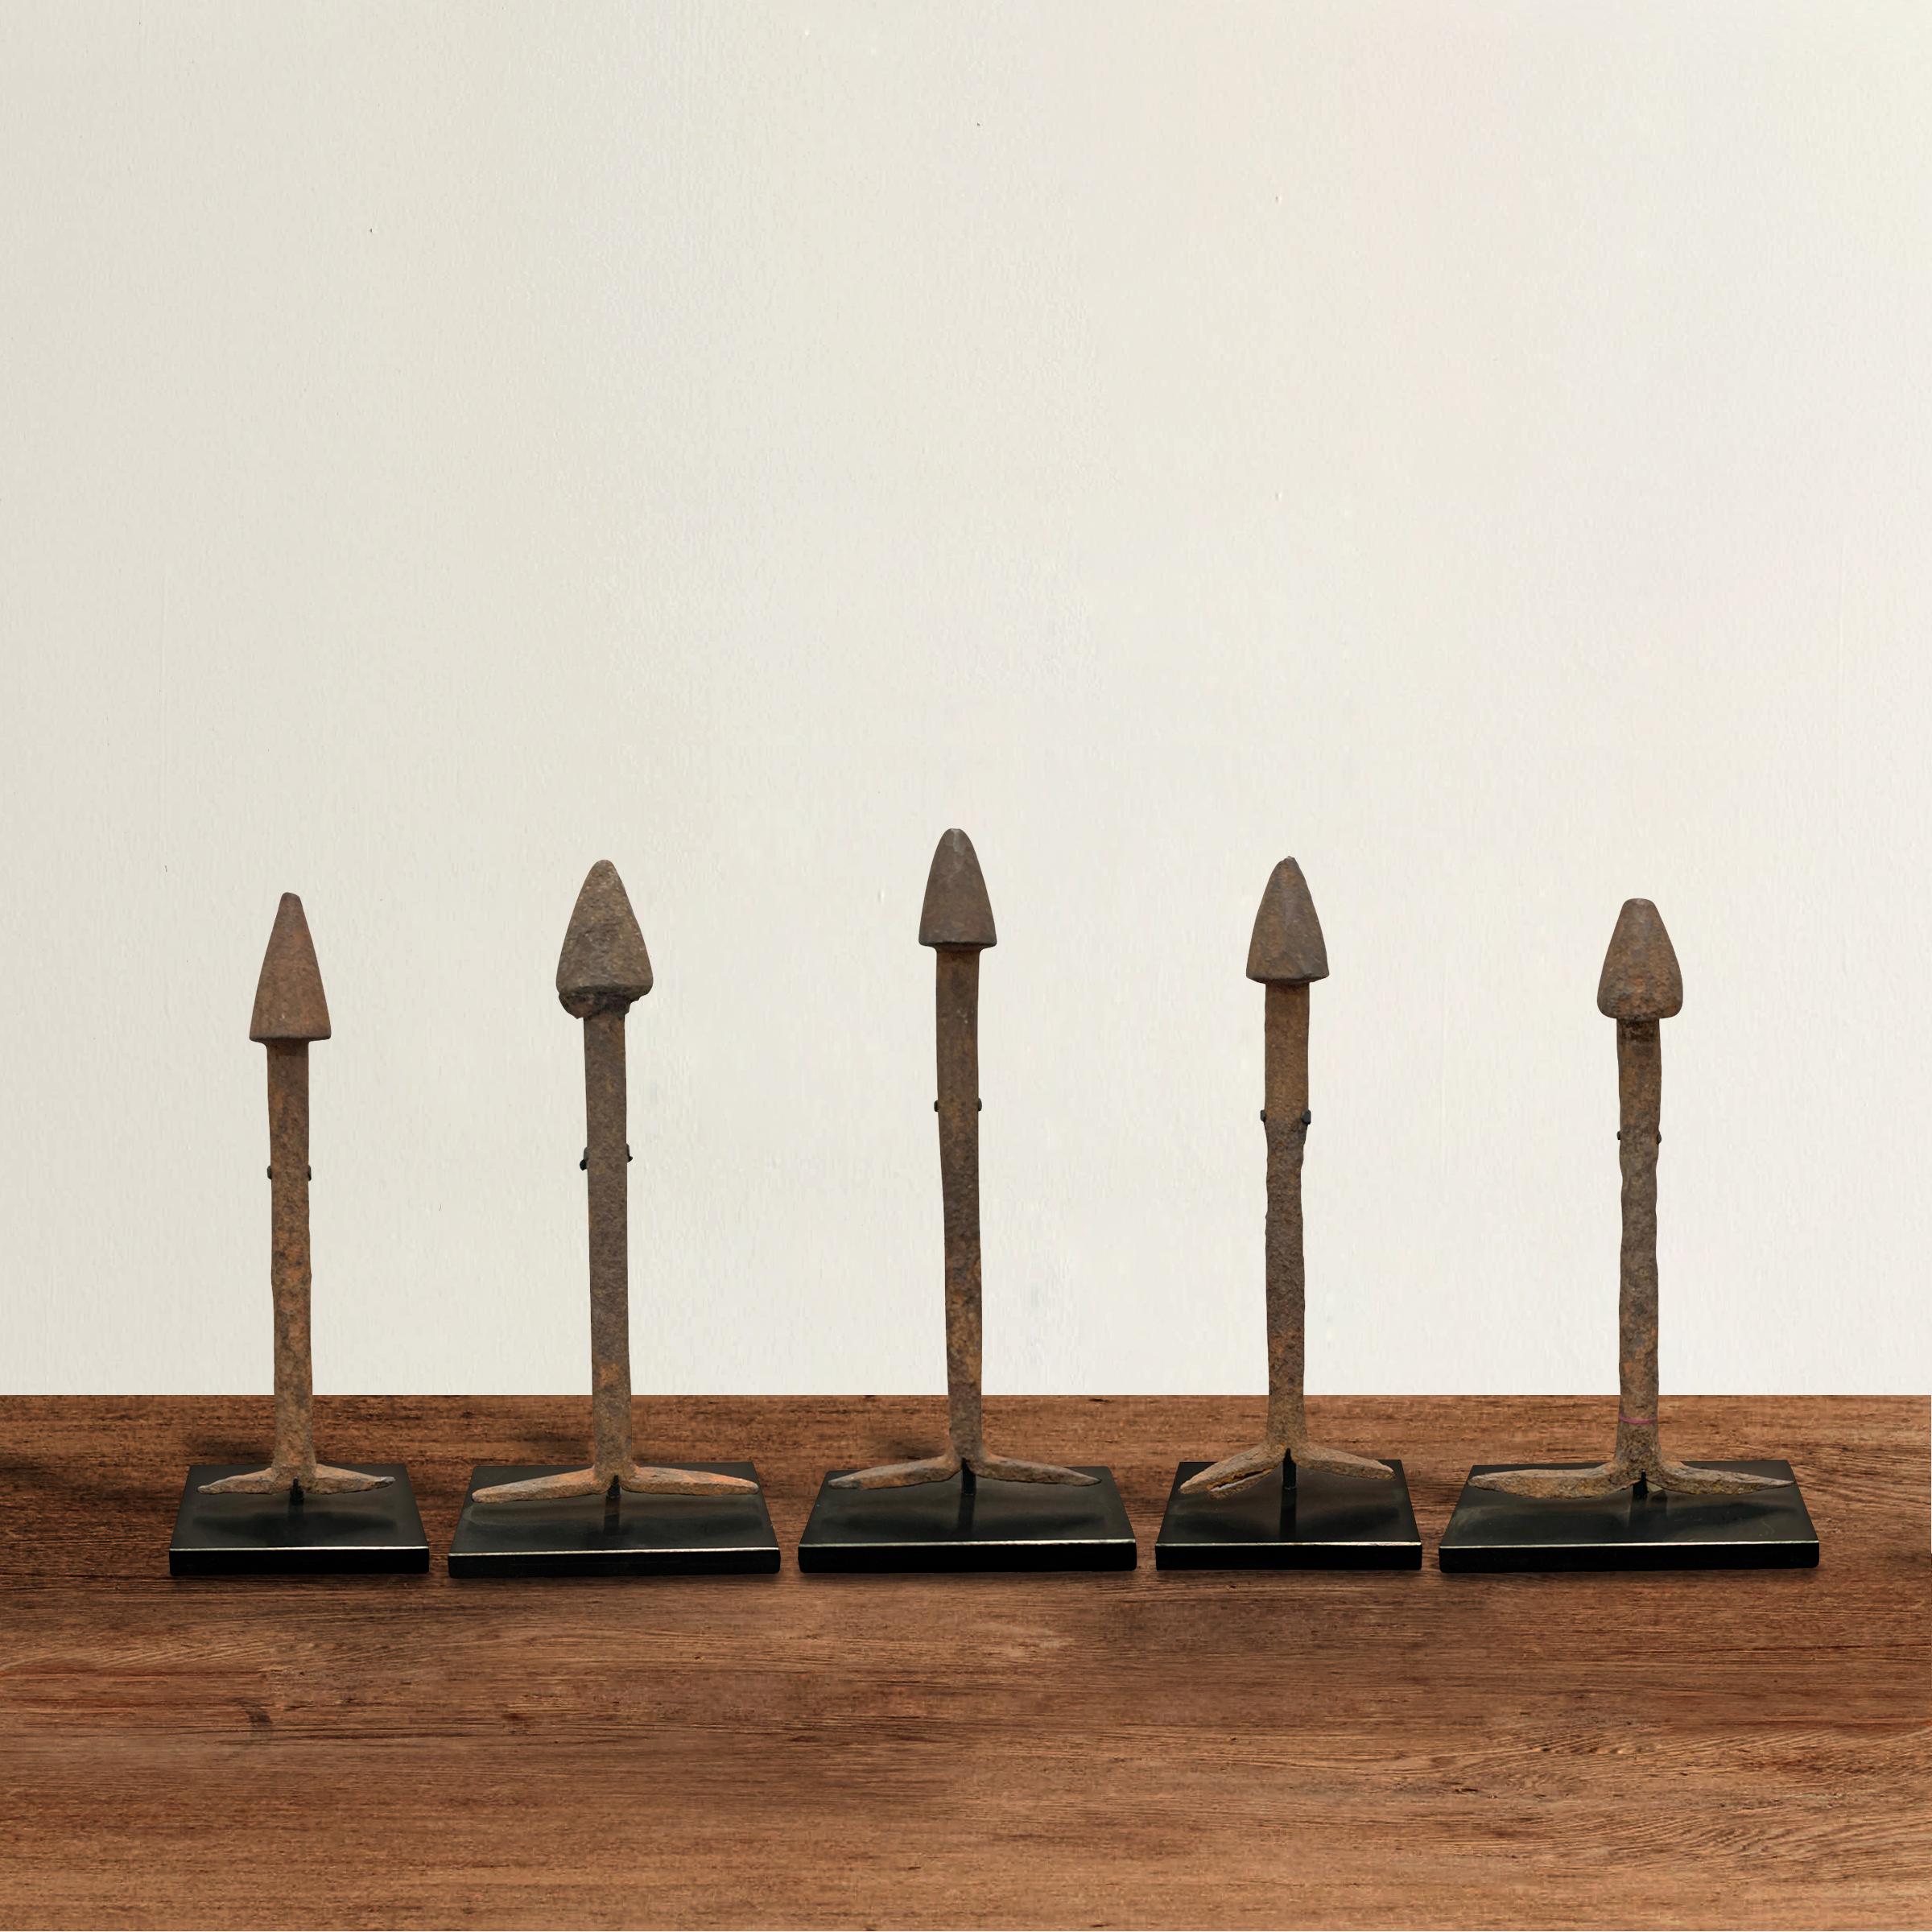 A wonderful set of five early 20th century iron phallus figures from Togo. Fertility figures like these were planted in the ground of a farmer's field to promote the fertility of the land. Each is mounted on a custom steel stand.